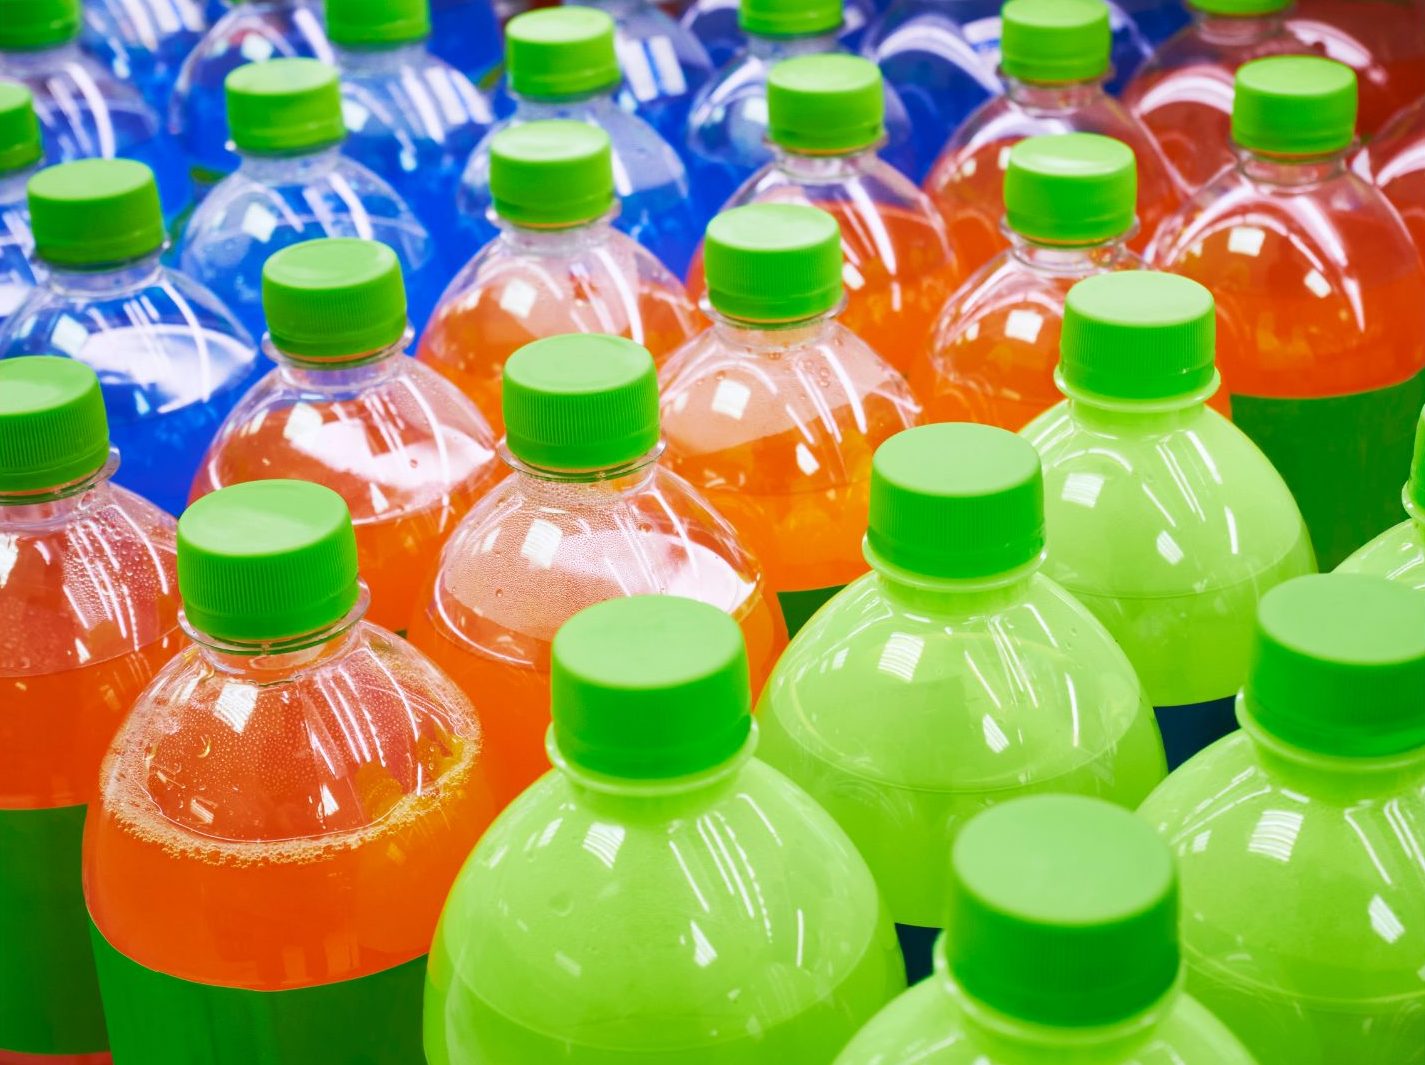 DOH seeks higher taxes on sweetened beverages, junk food - Freedom News PH